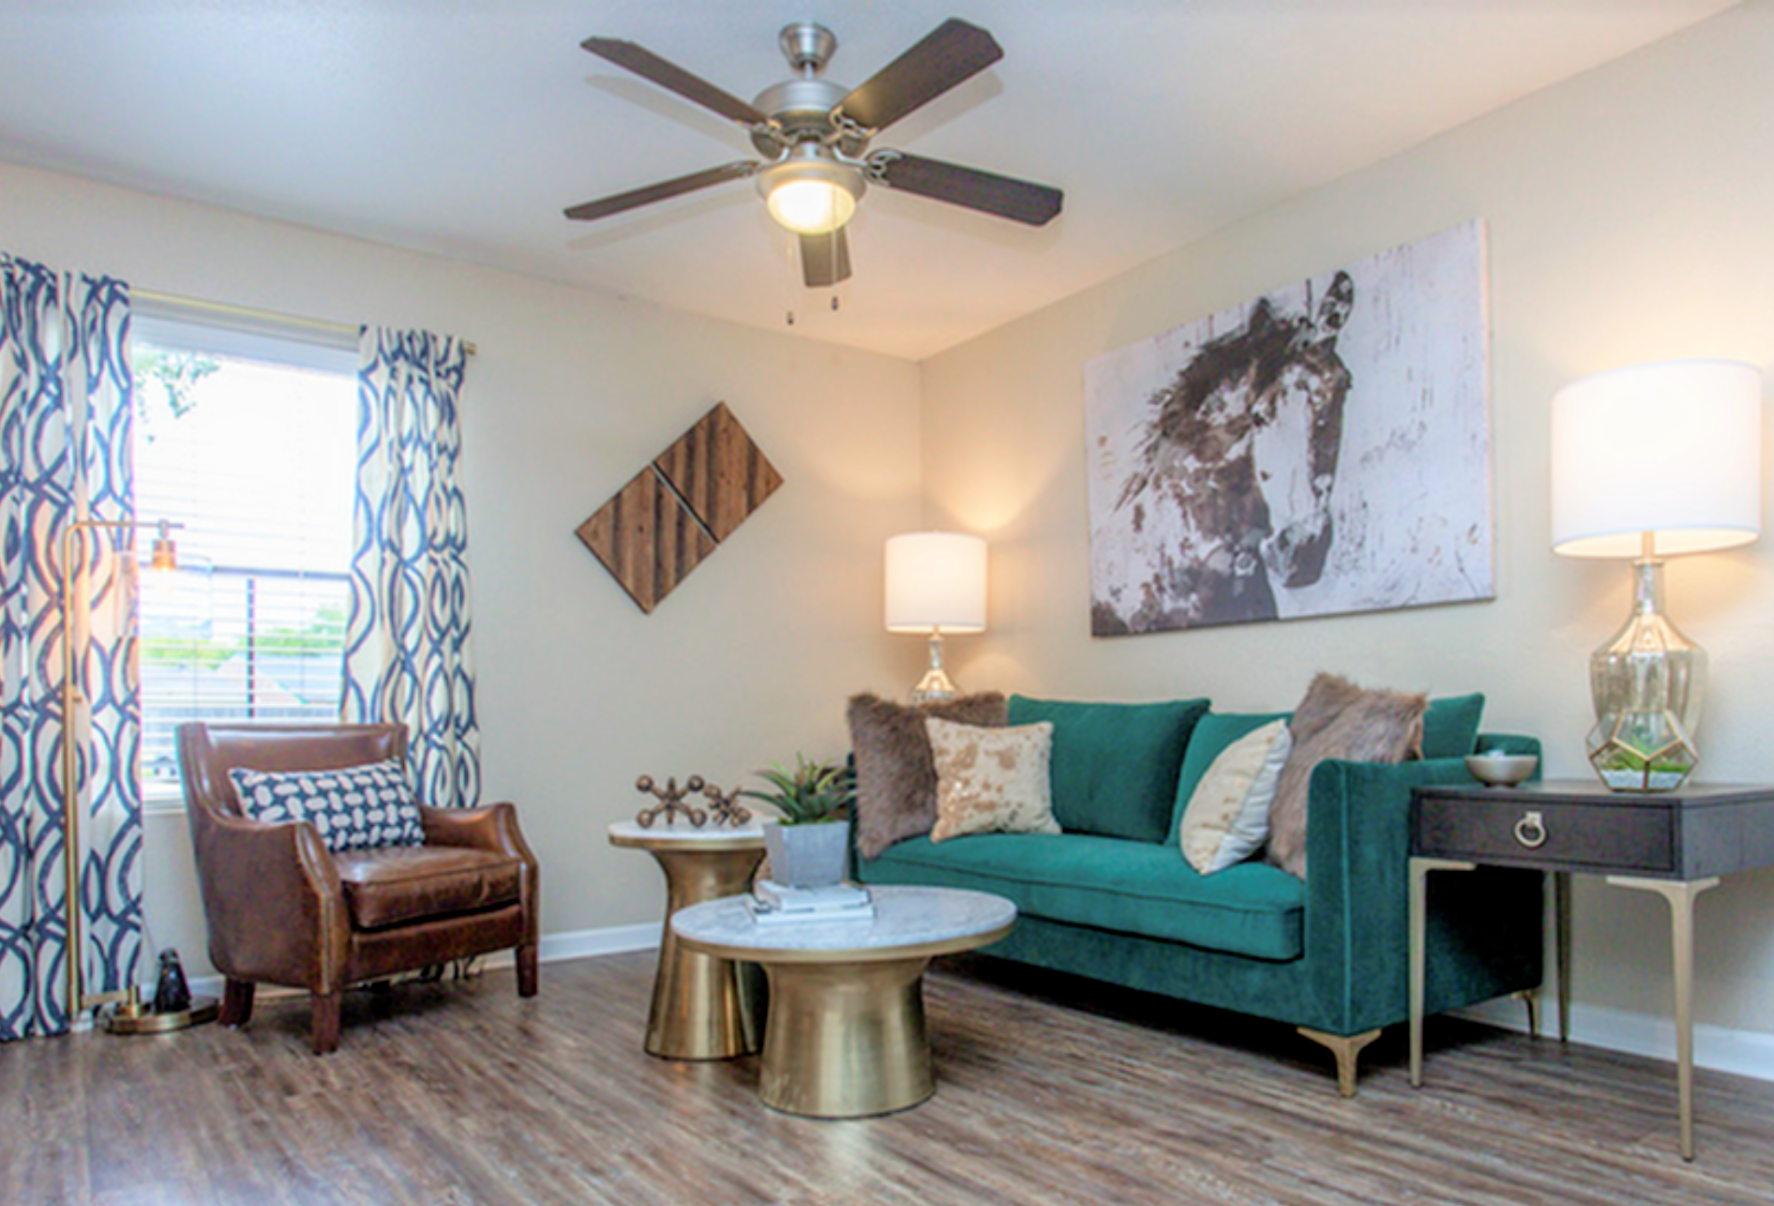 Spacious Living Room with Ceiling Fan | Steepleway Downs